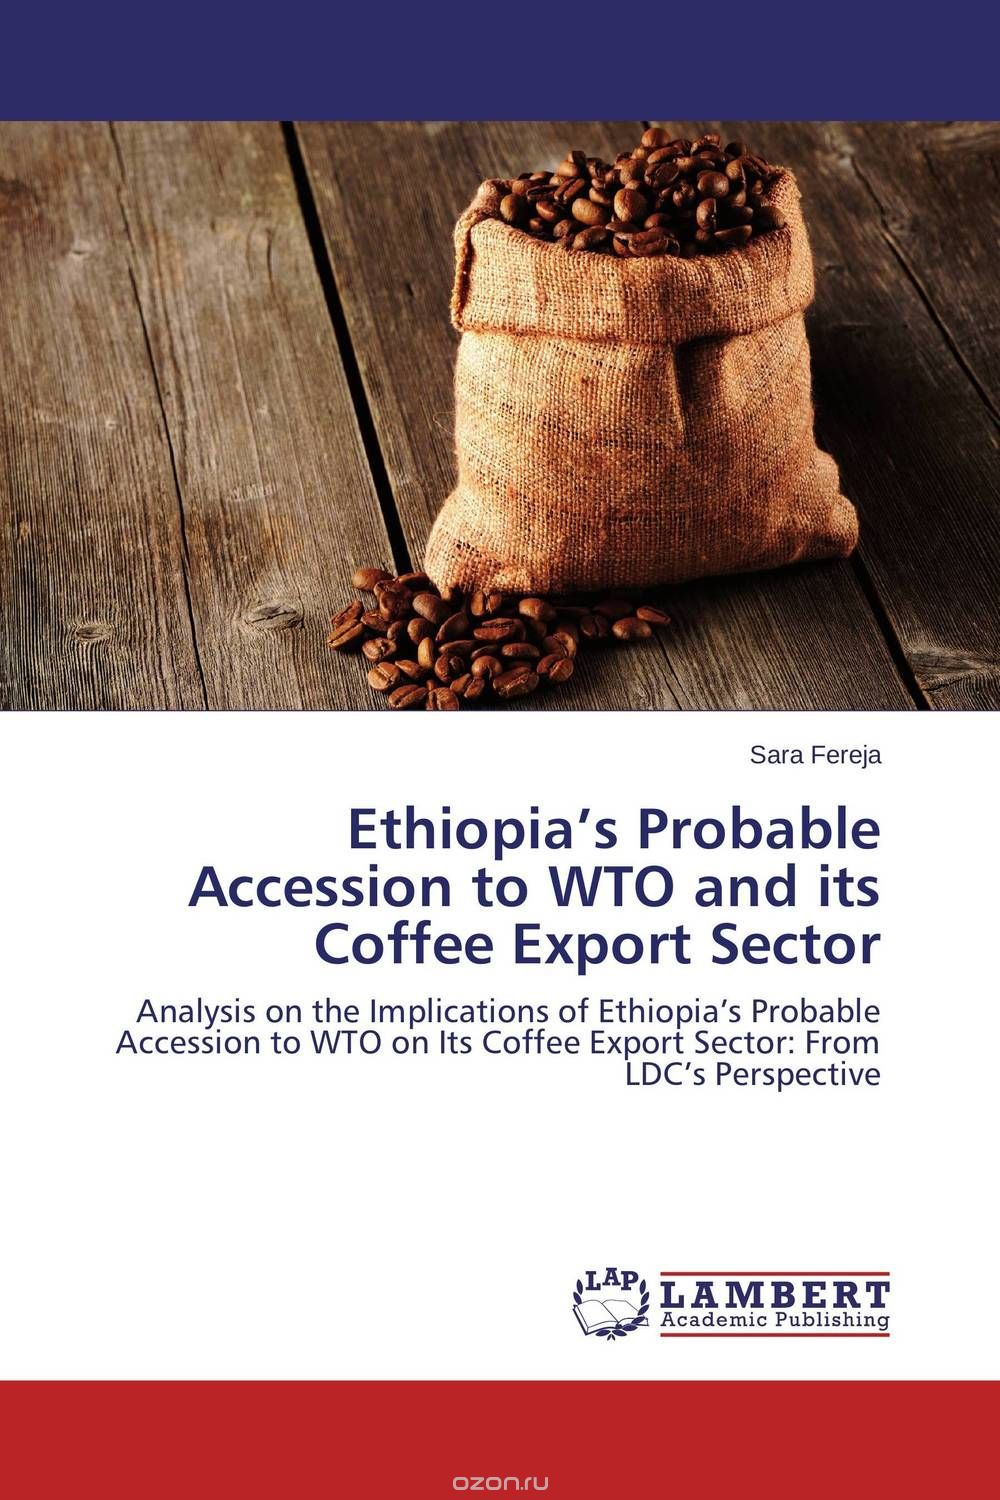 Ethiopia’s Probable Accession to WTO and its Coffee Export Sector